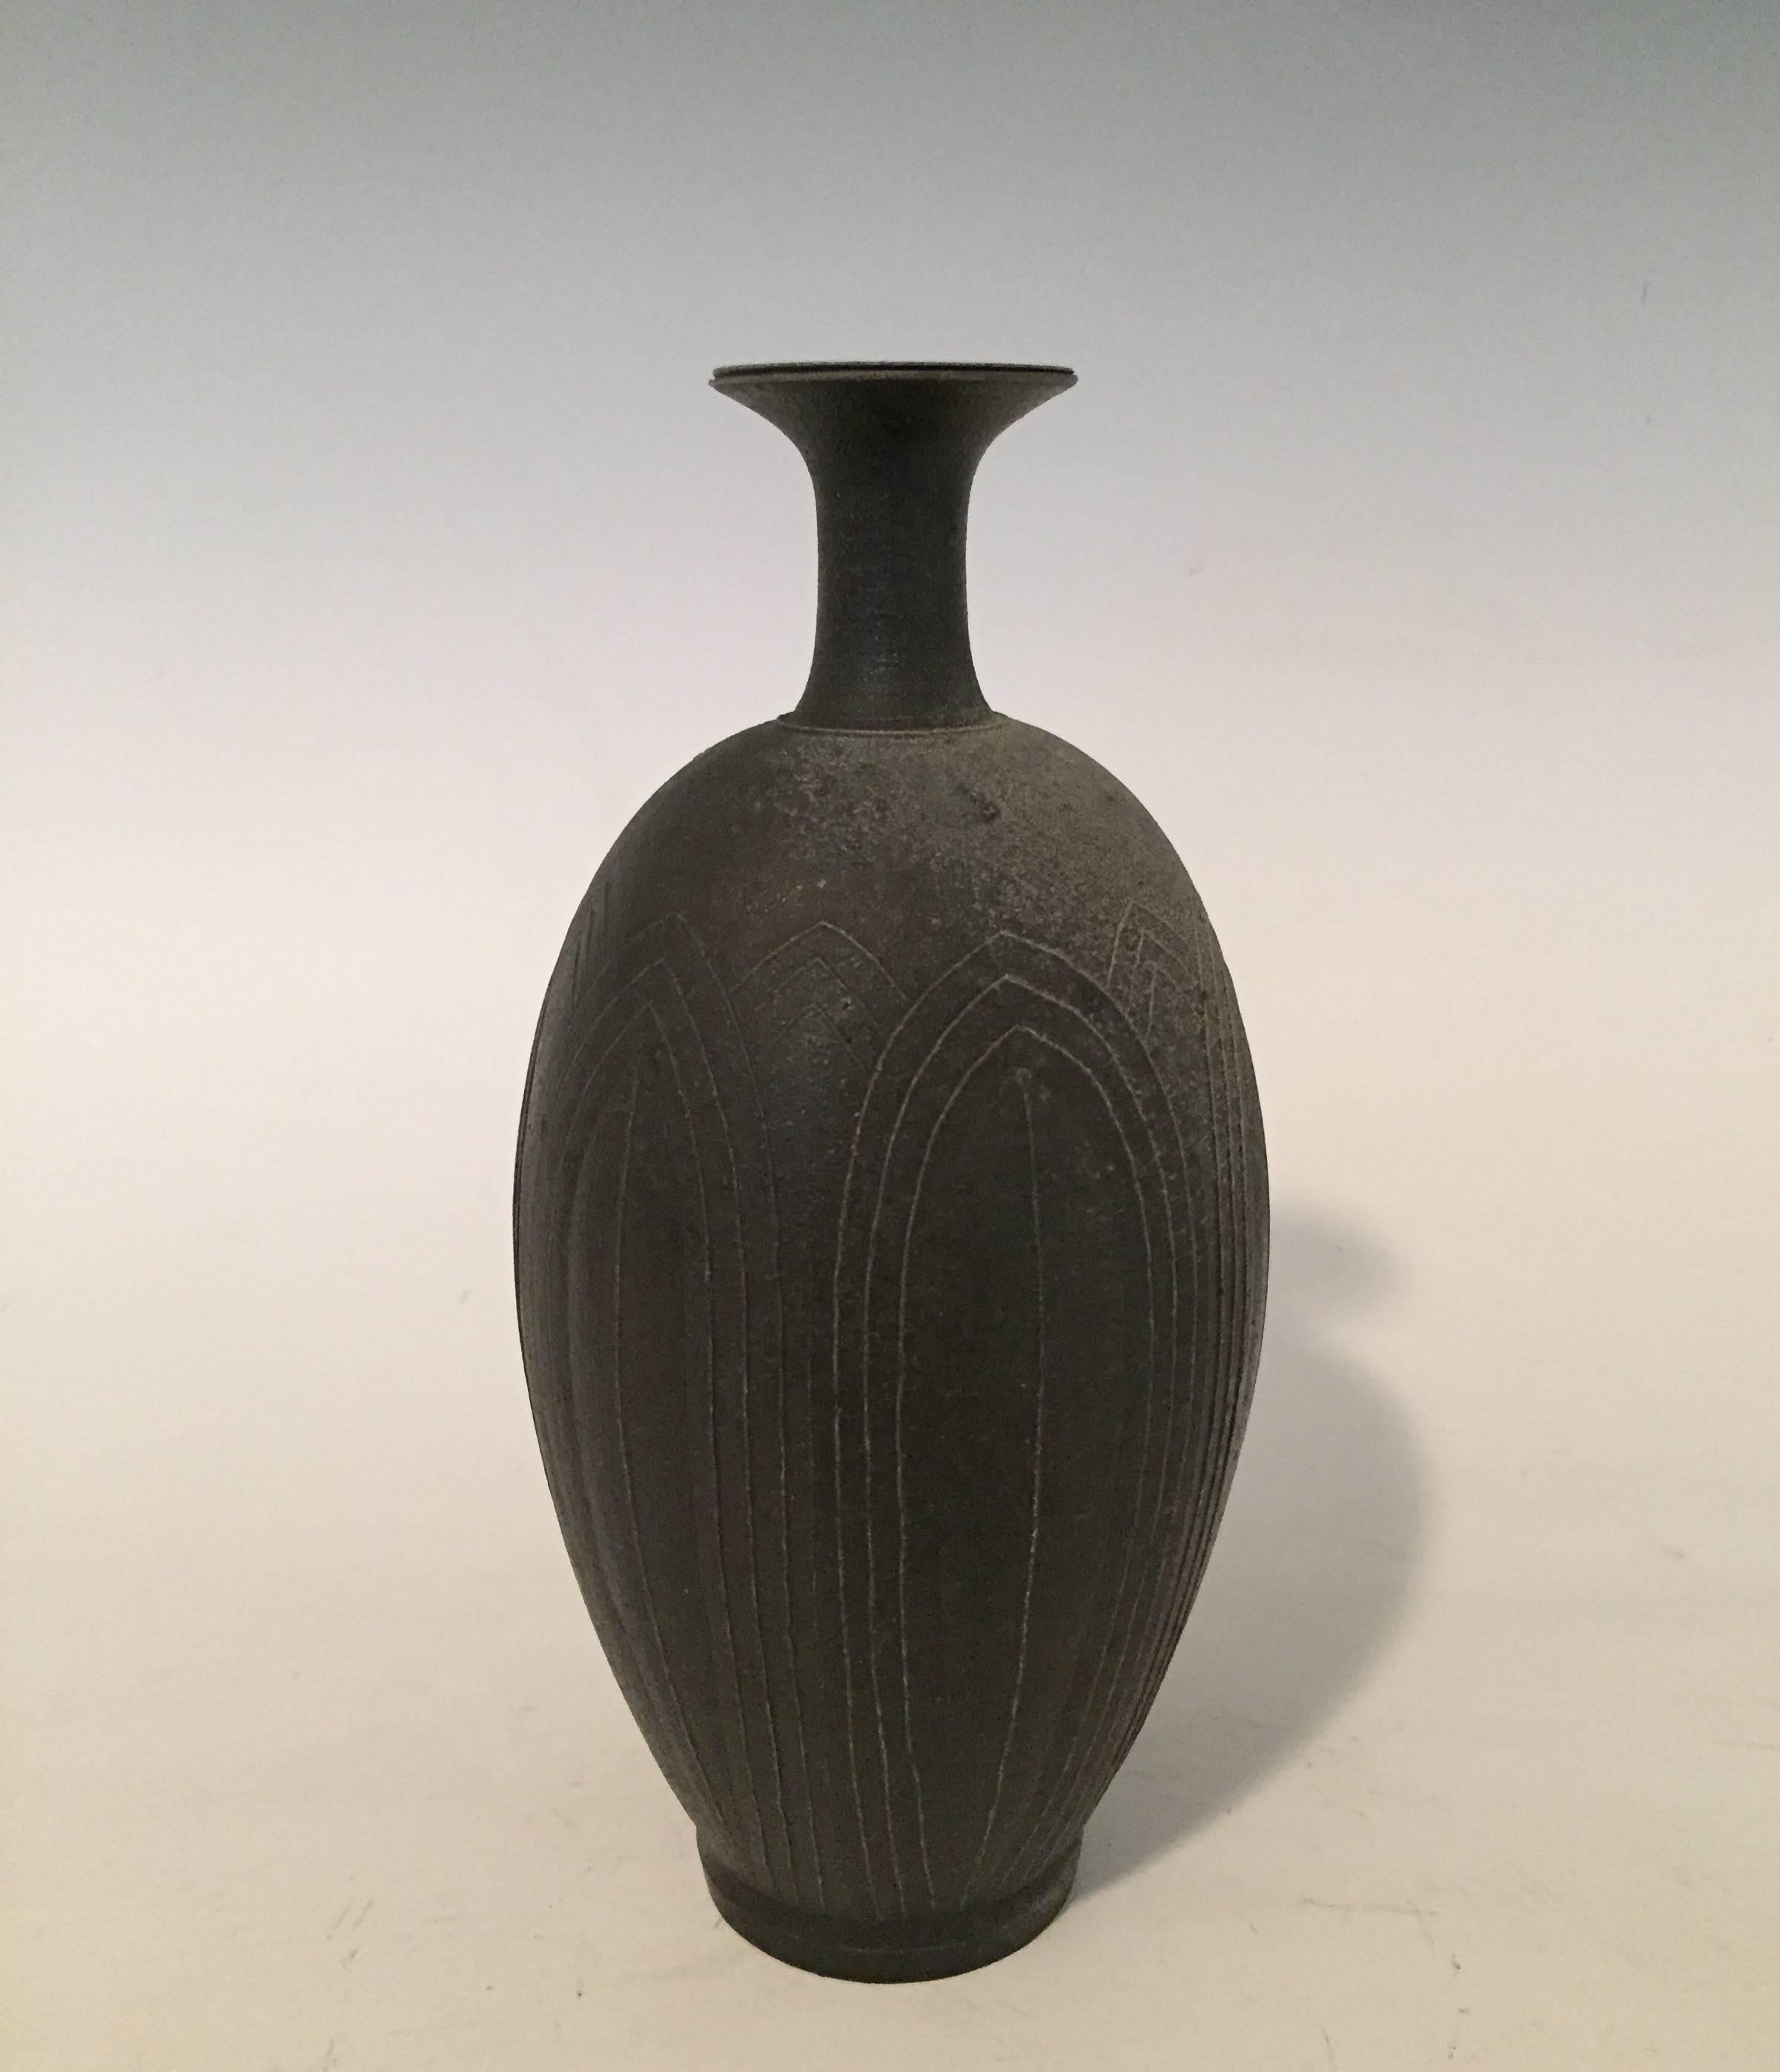 
A one of a kind stoneware vase by Japanese Ceramicist Koji Toda (born 1974-).
Of rounded form with elongated neck, and simple lines in the shape of a lotus flower.
Inspired by bronze forms from pre 12th century water pitchers.
The beautiful